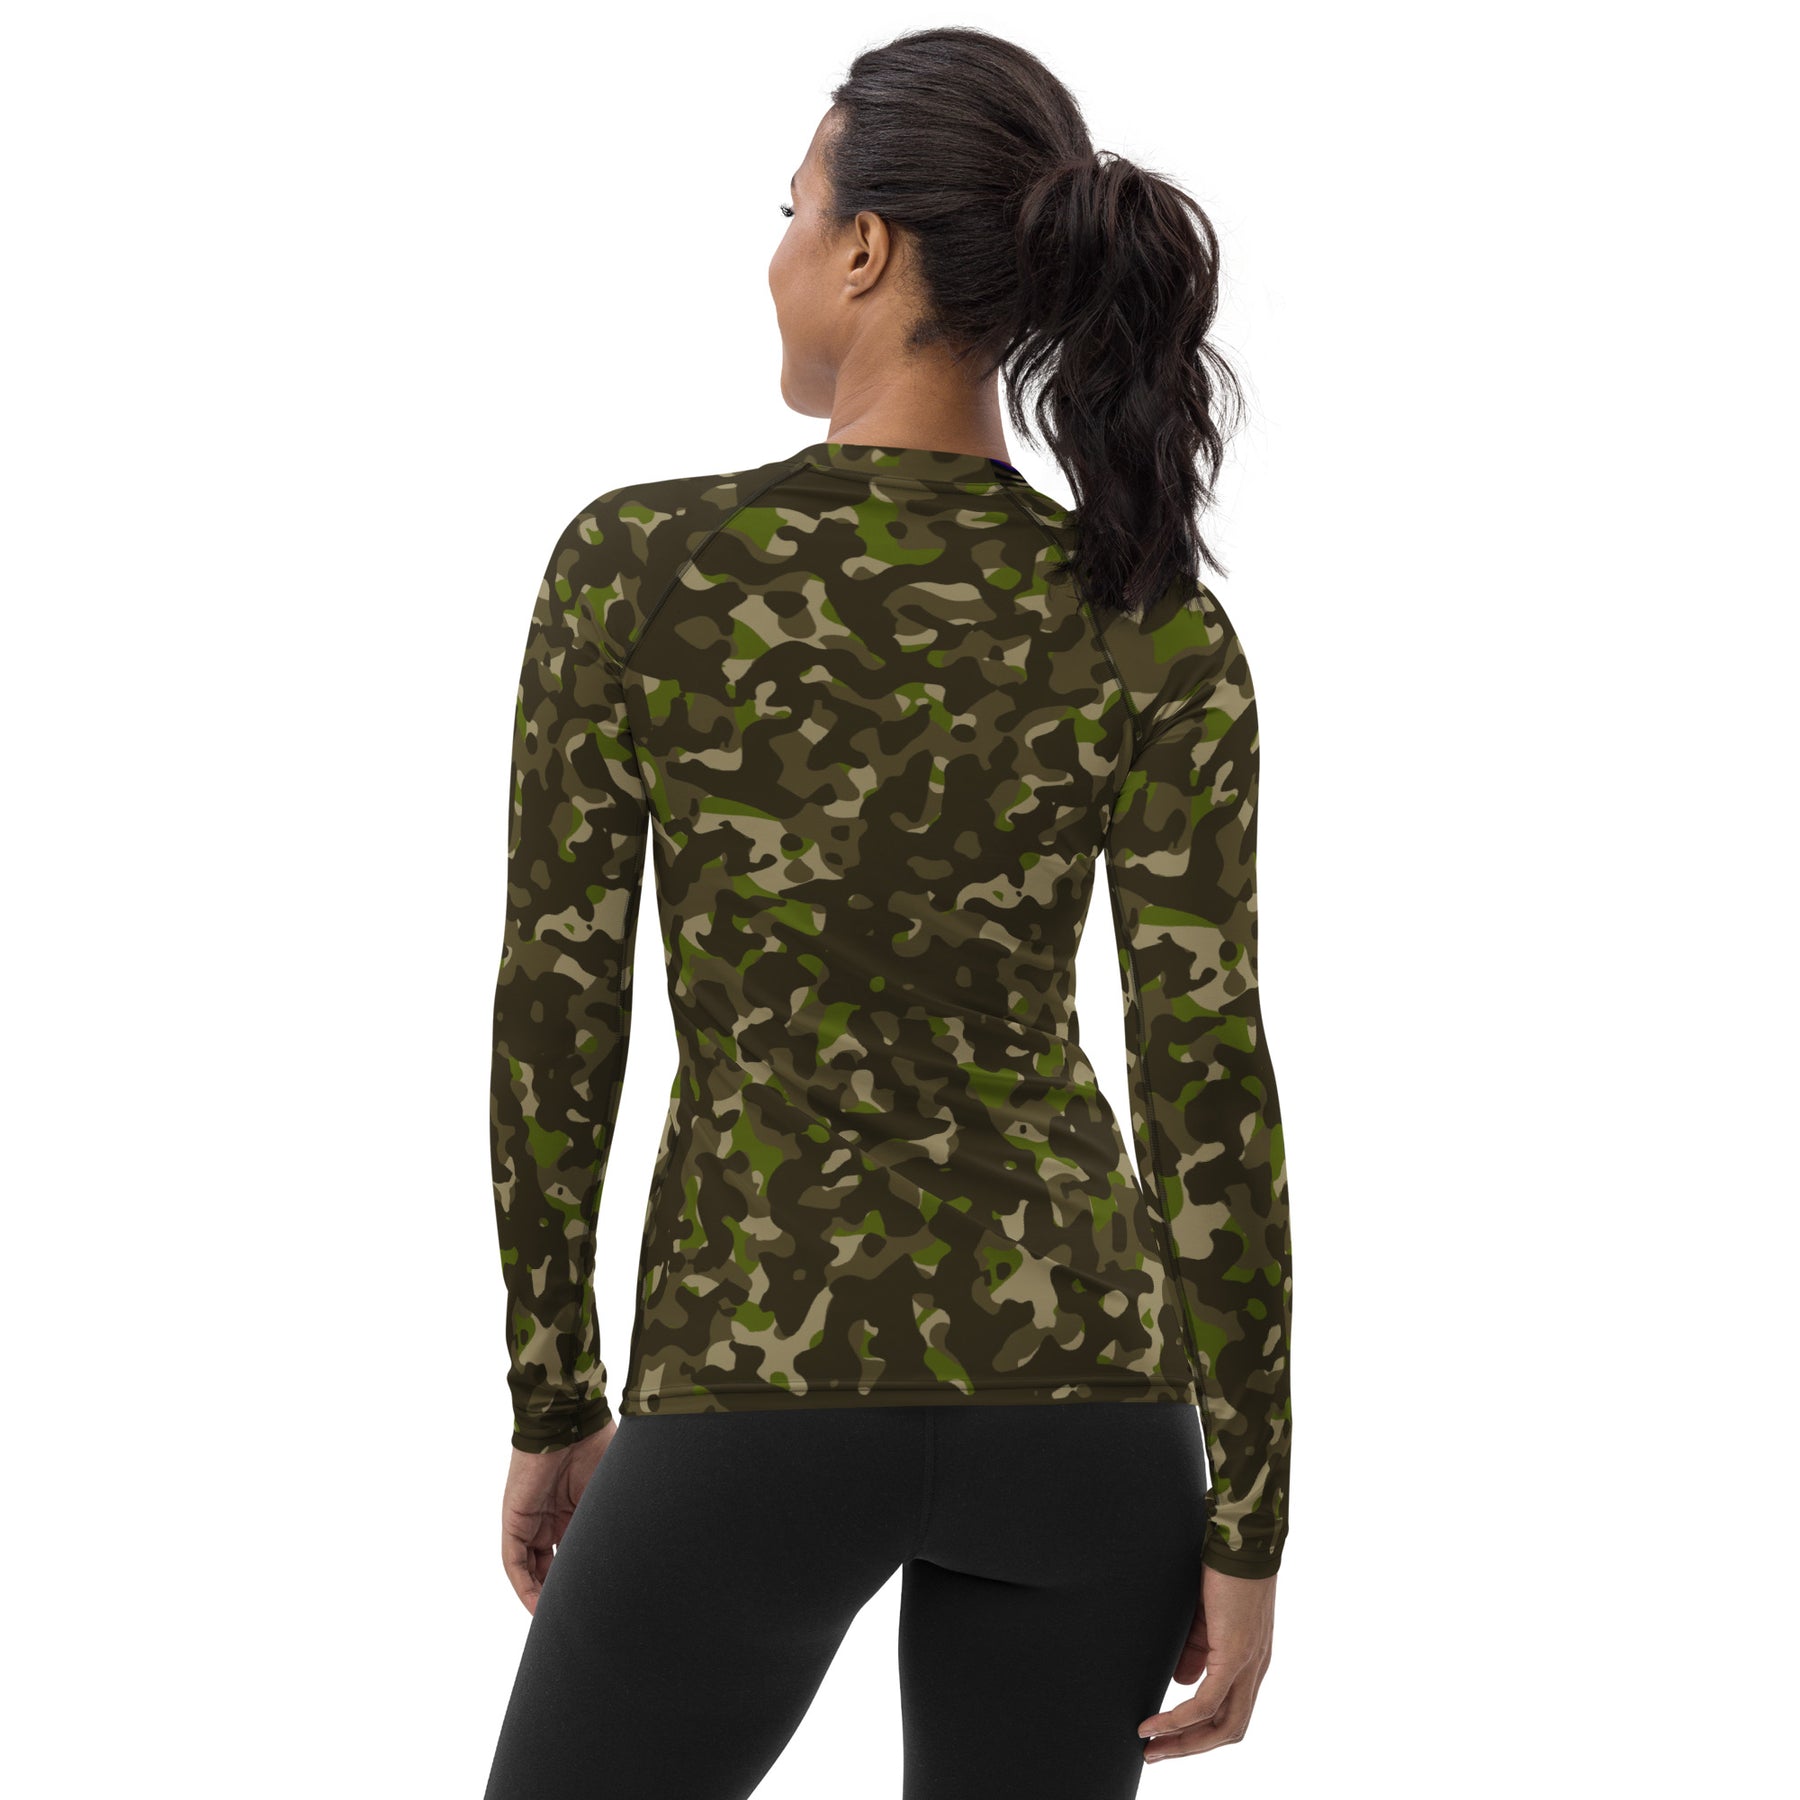 Outer Limit Supply Deep Woods / Forest Women's Rash Guard